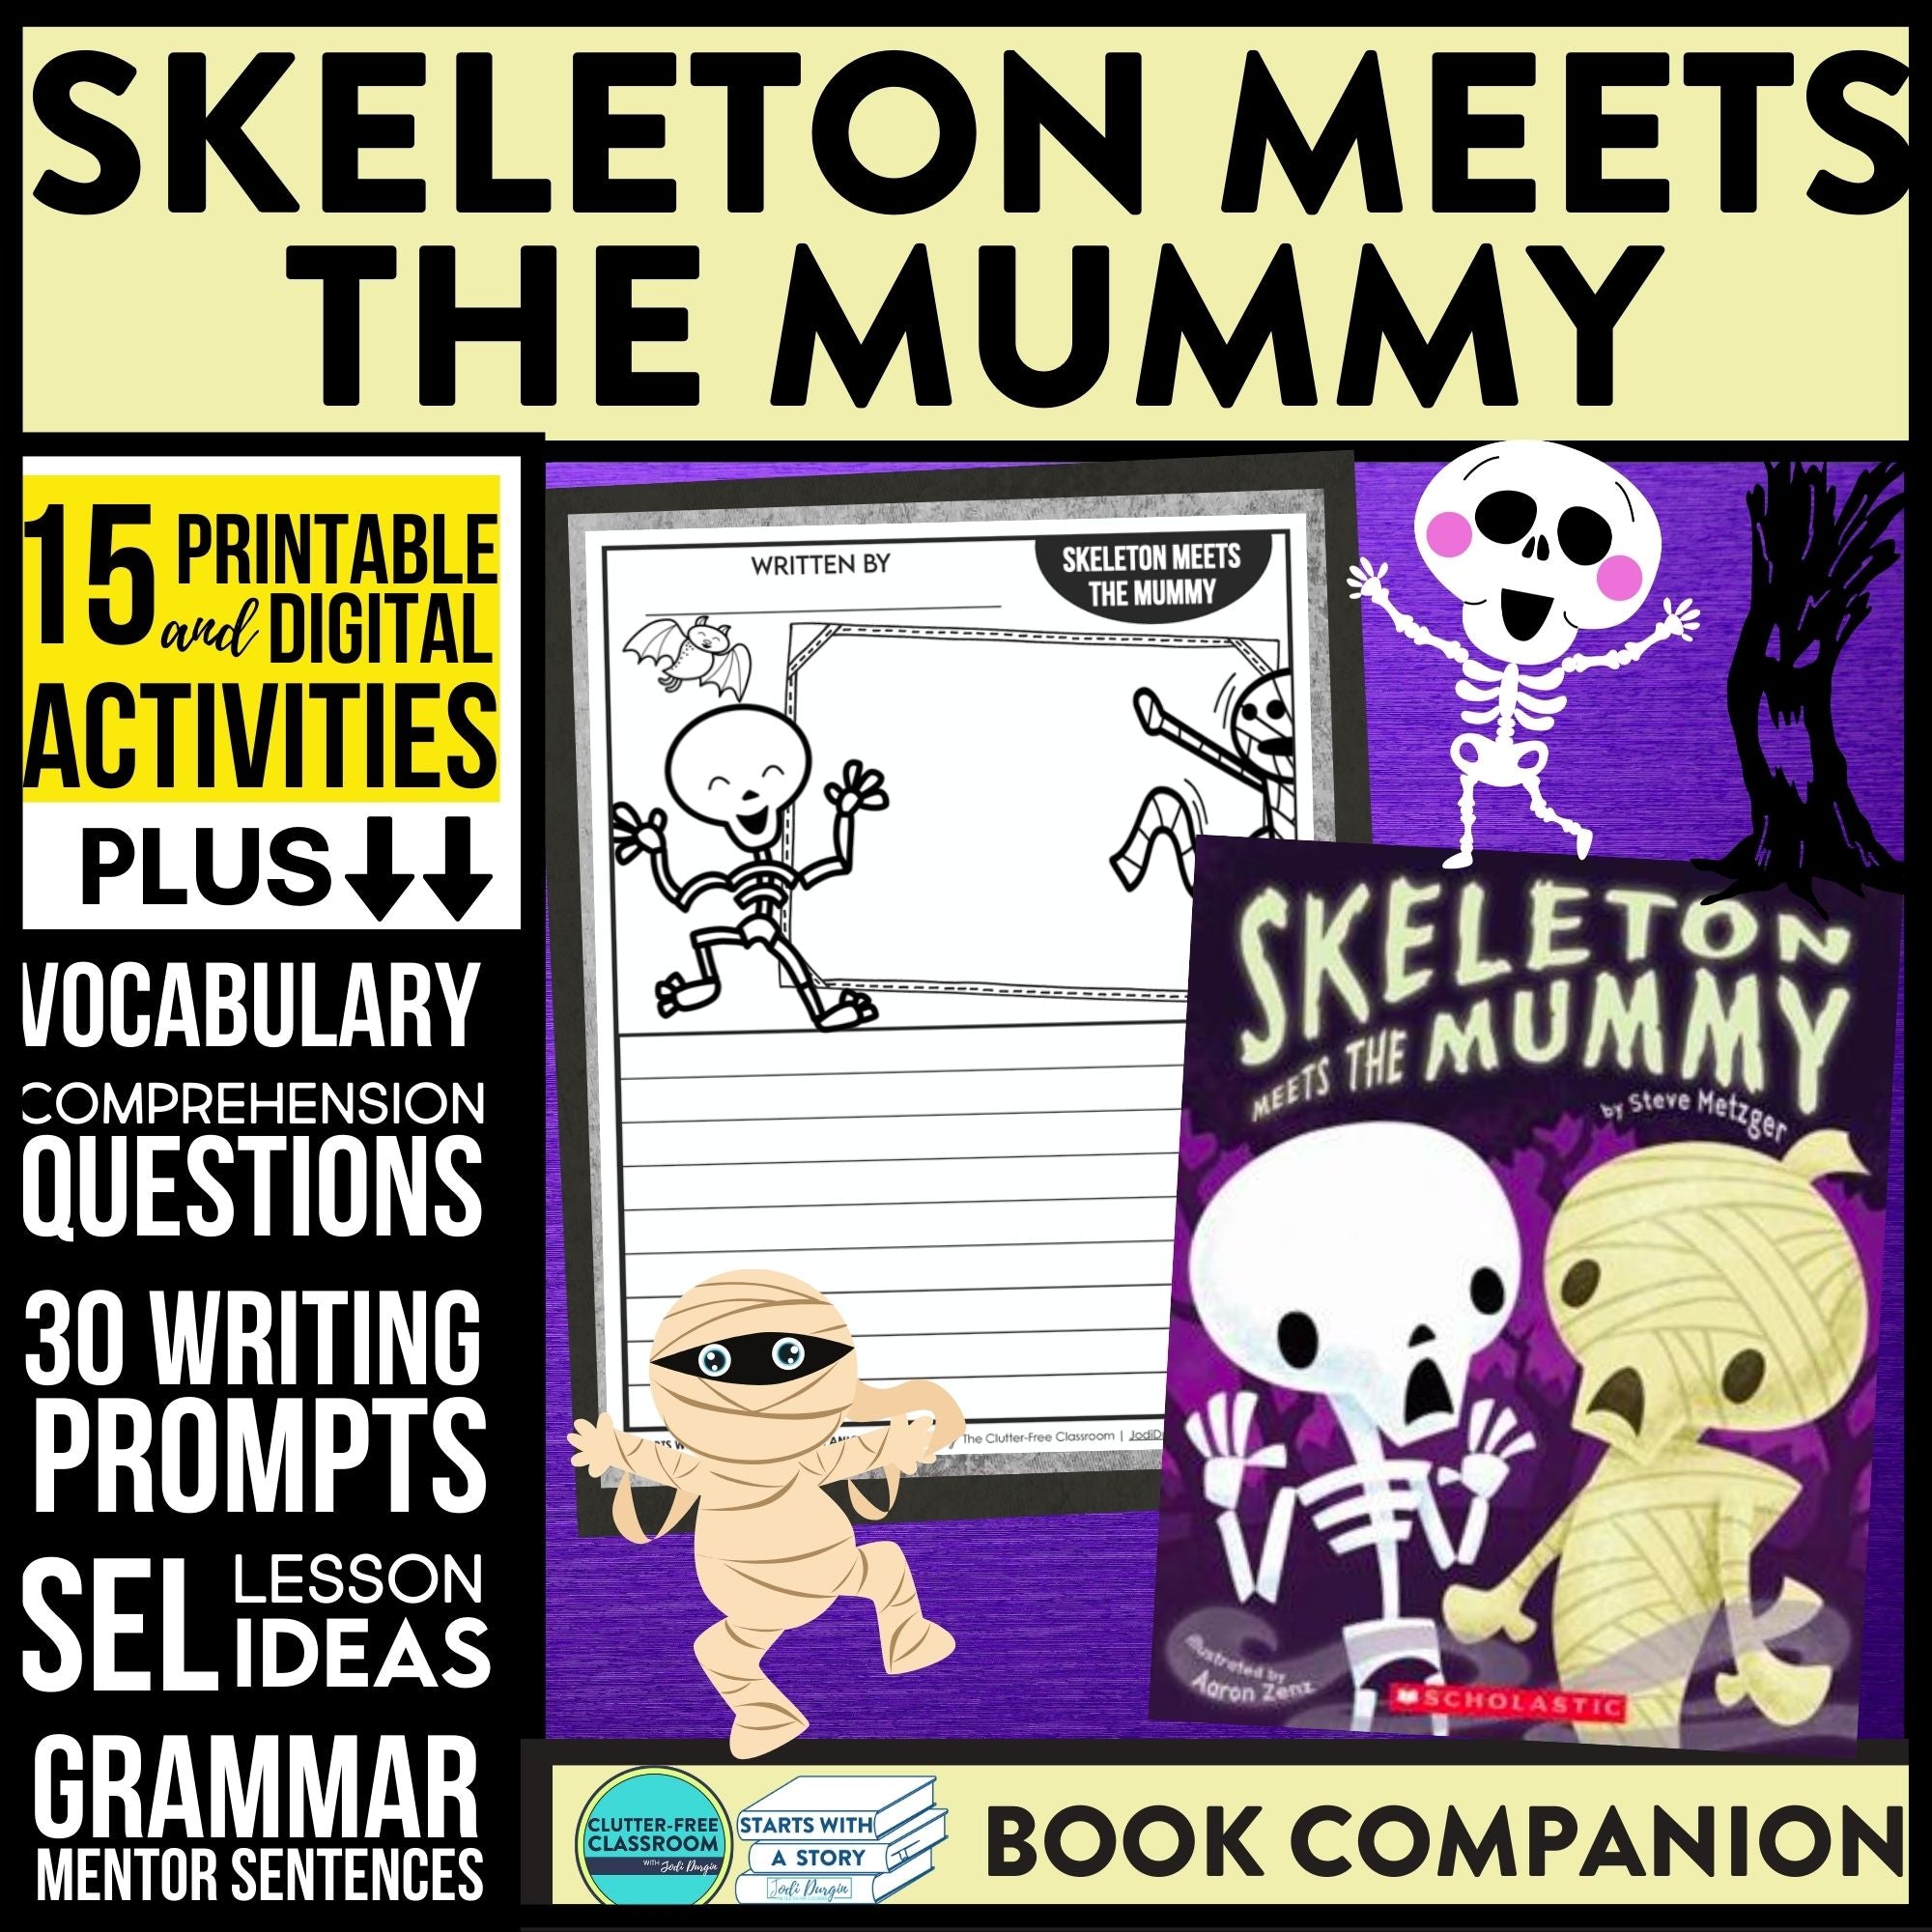 SKELETON MEETS THE MUMMY activities and lesson plan ideas